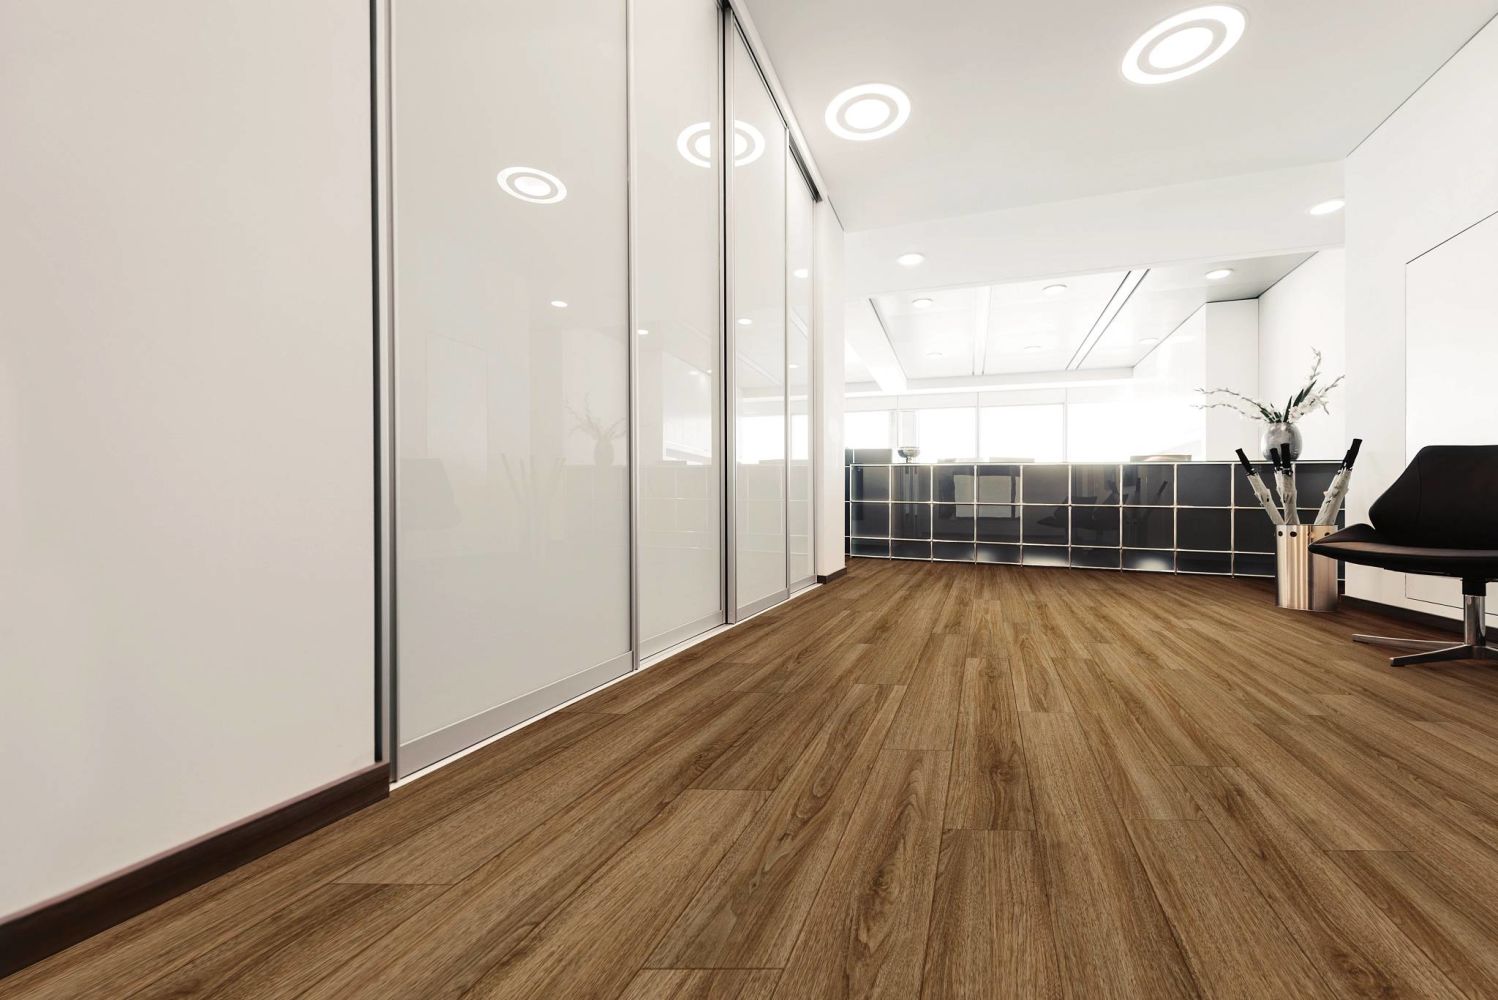 Shaw Floors Resilient Property Solutions Revered Rocca Oak 02002_492CT